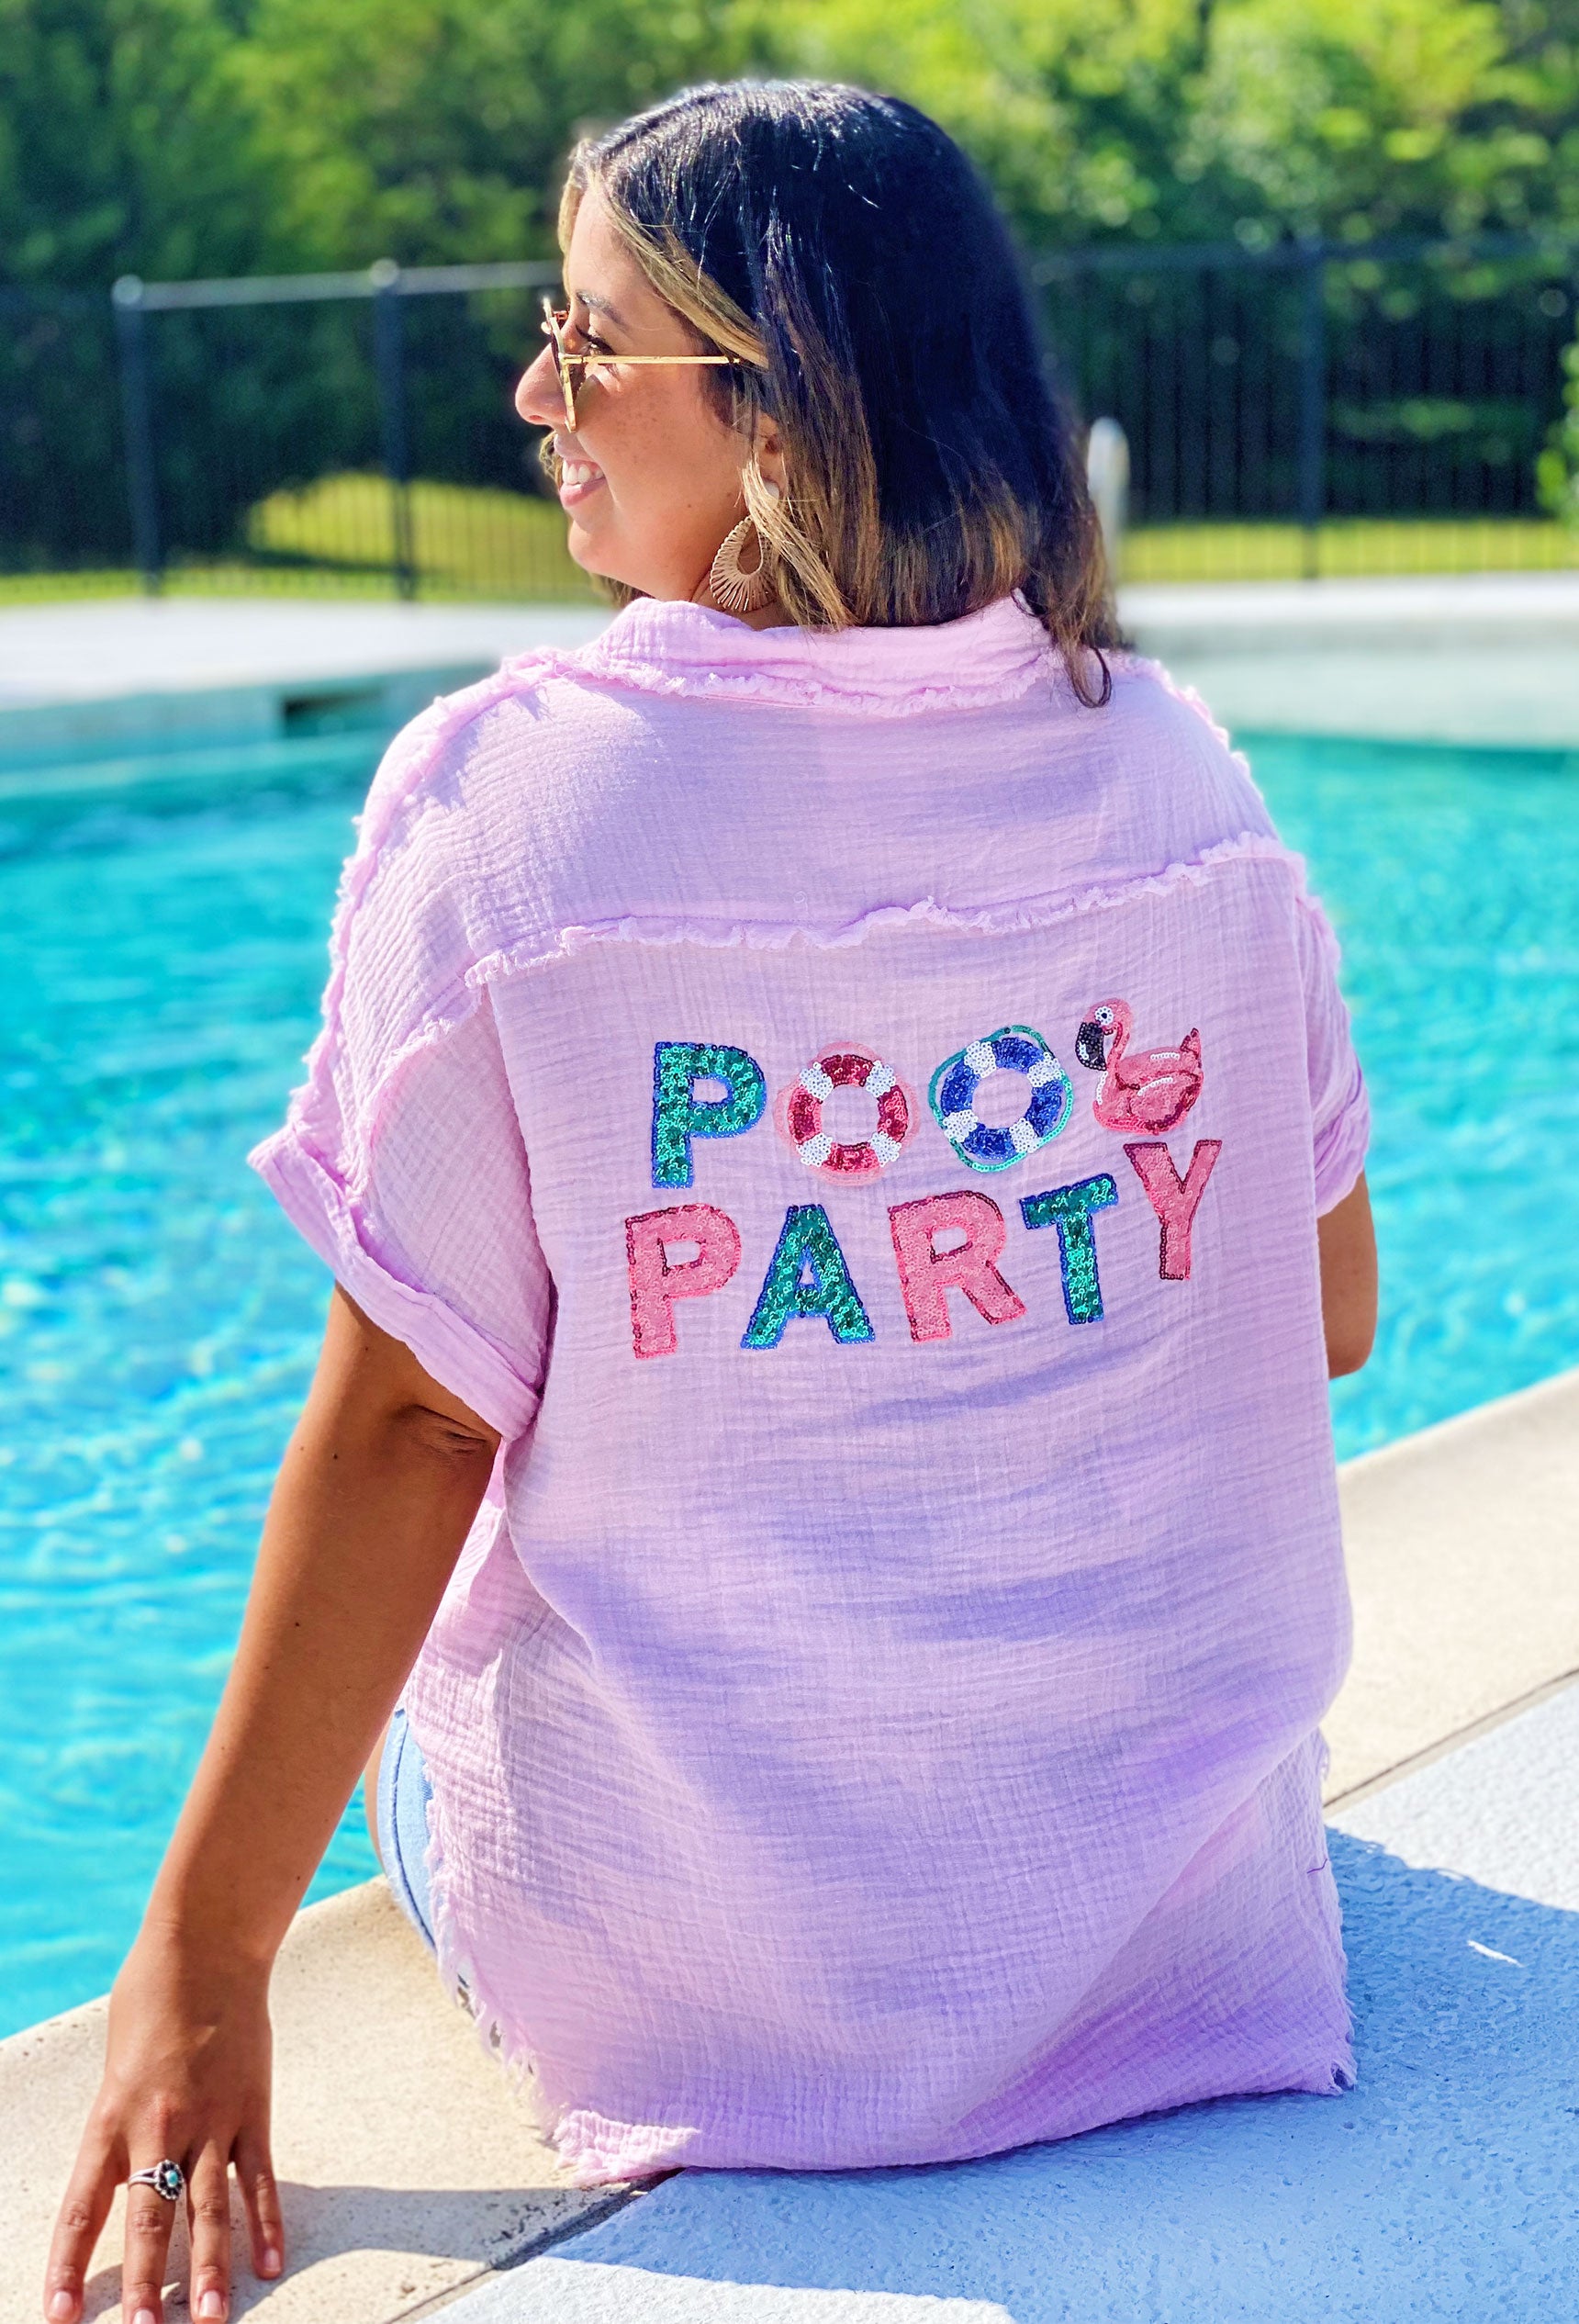 Pool Party Gauze Top, Light purple gauze, frayed hems and edges, and a fun sequin “Pool Party” on the back